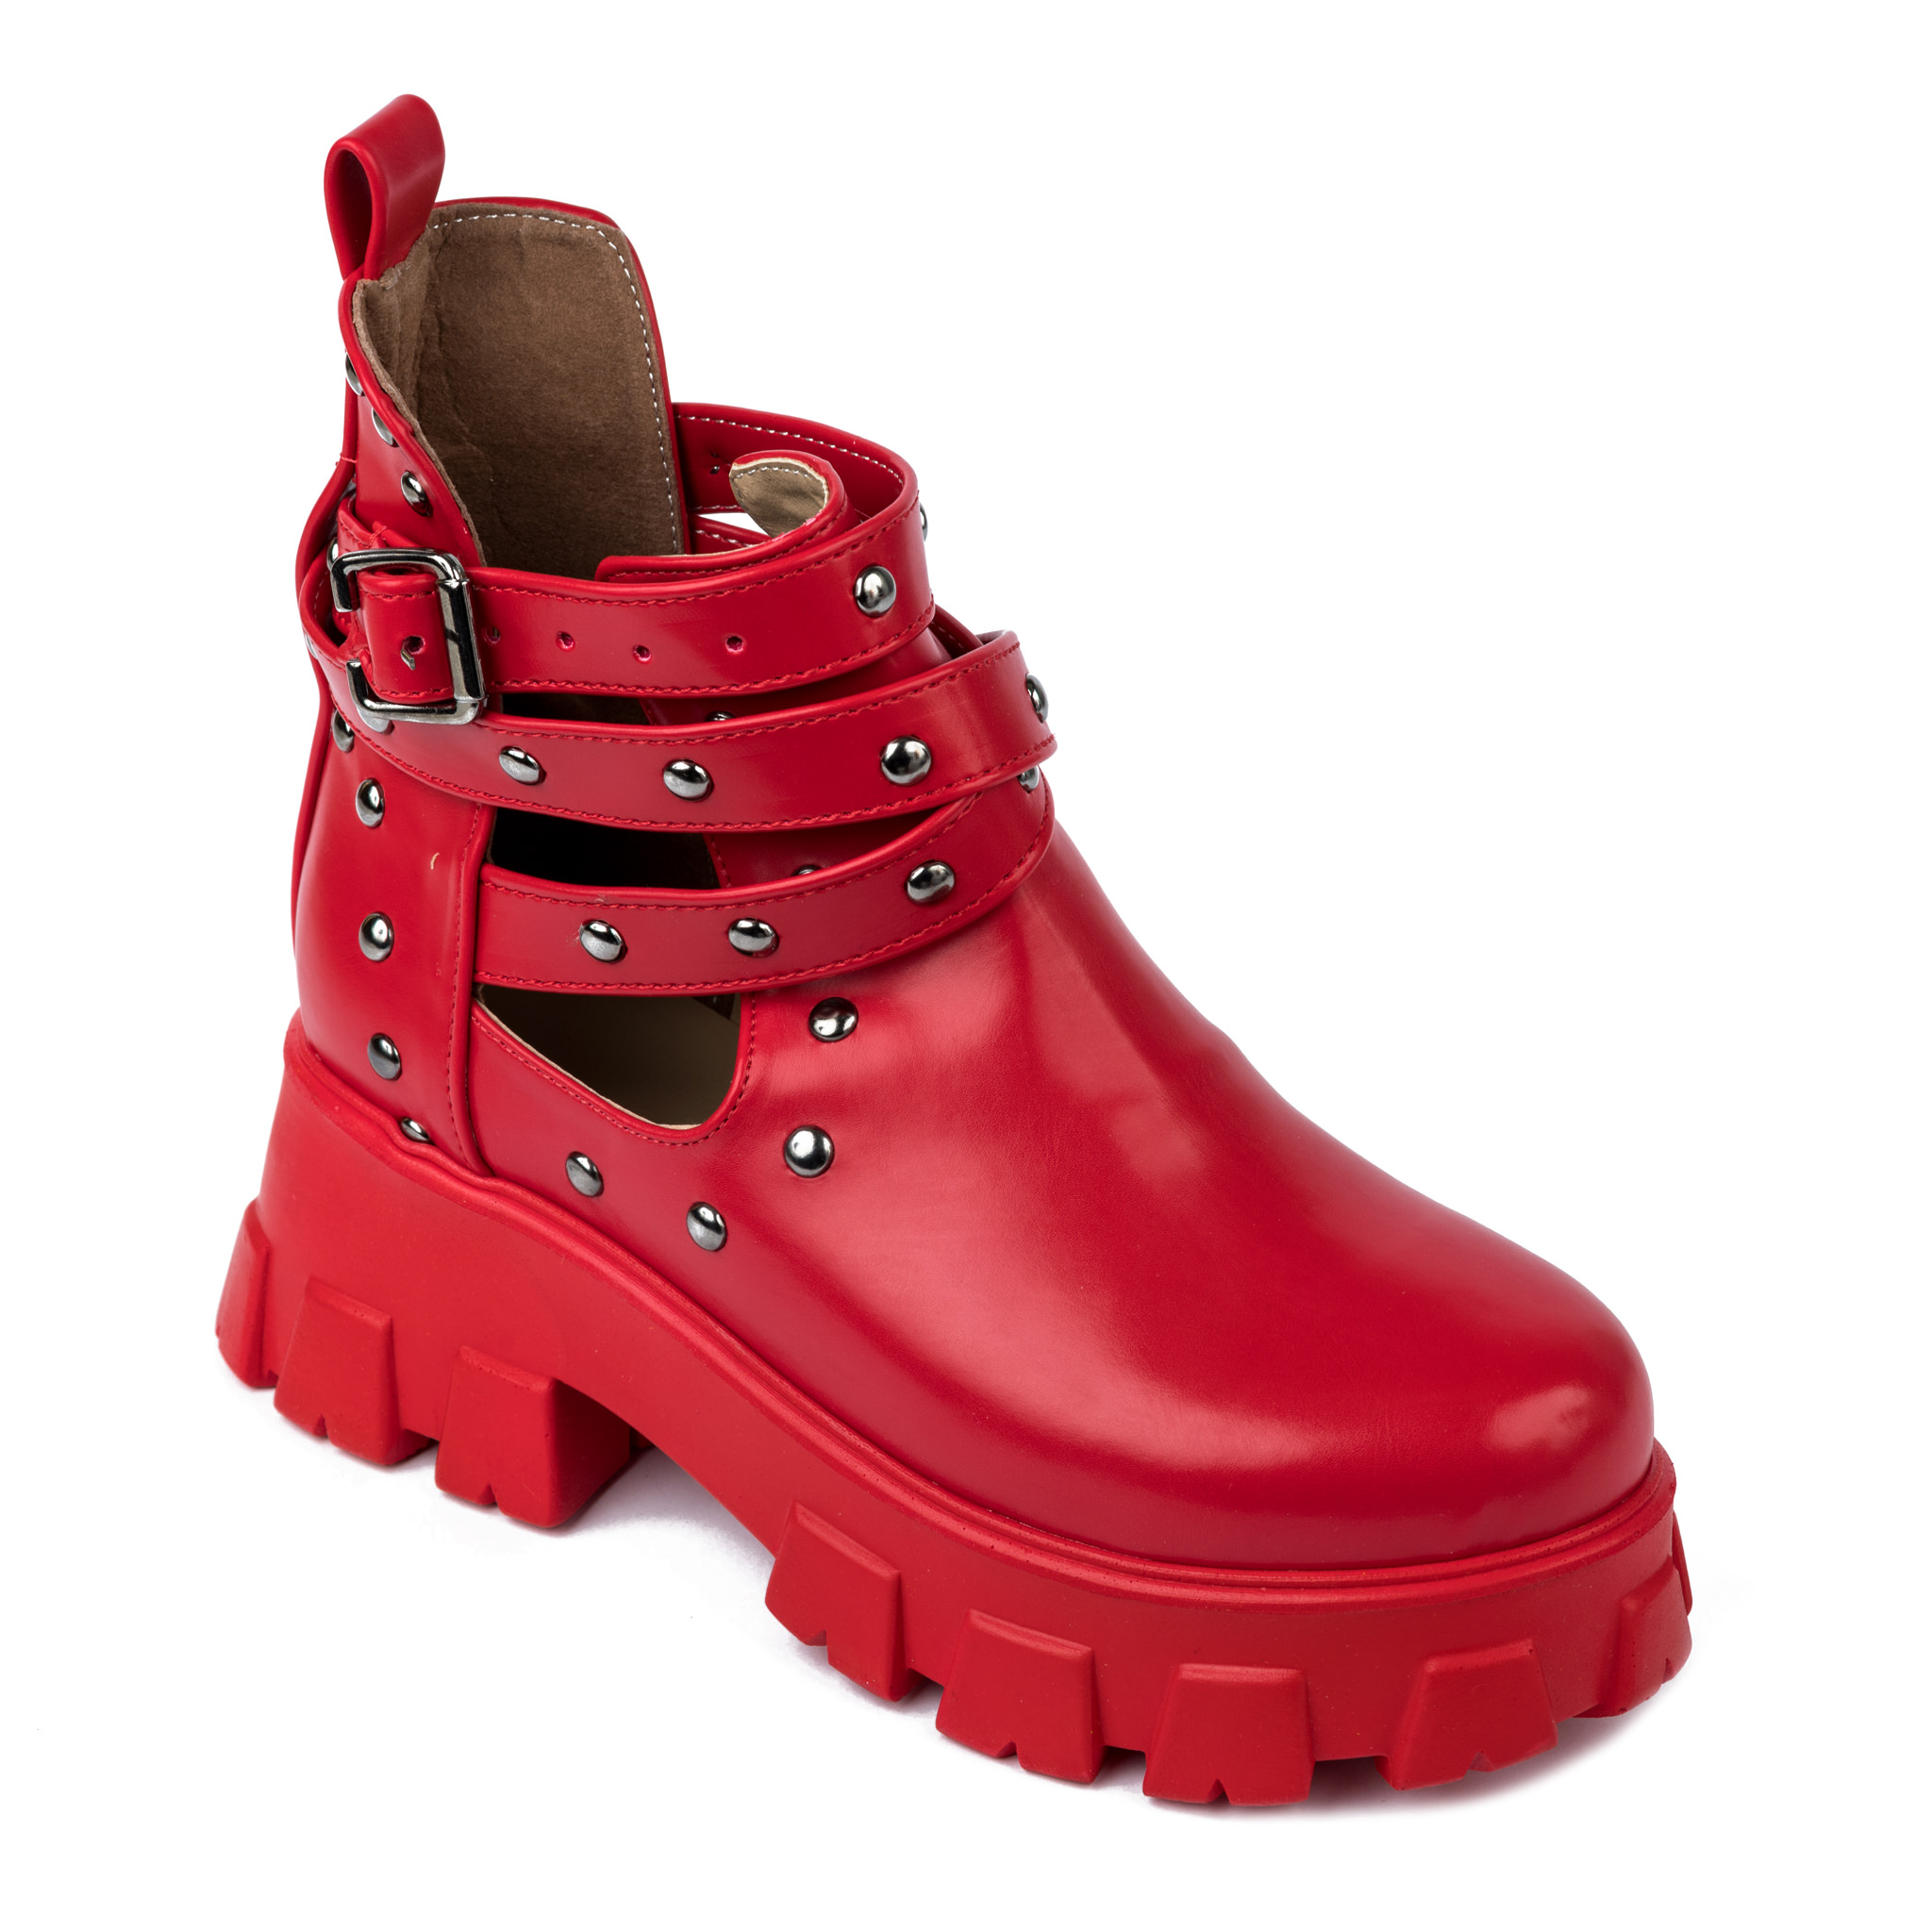 ANKLE BOOTS WITH BELTS AND RIVETS - RED